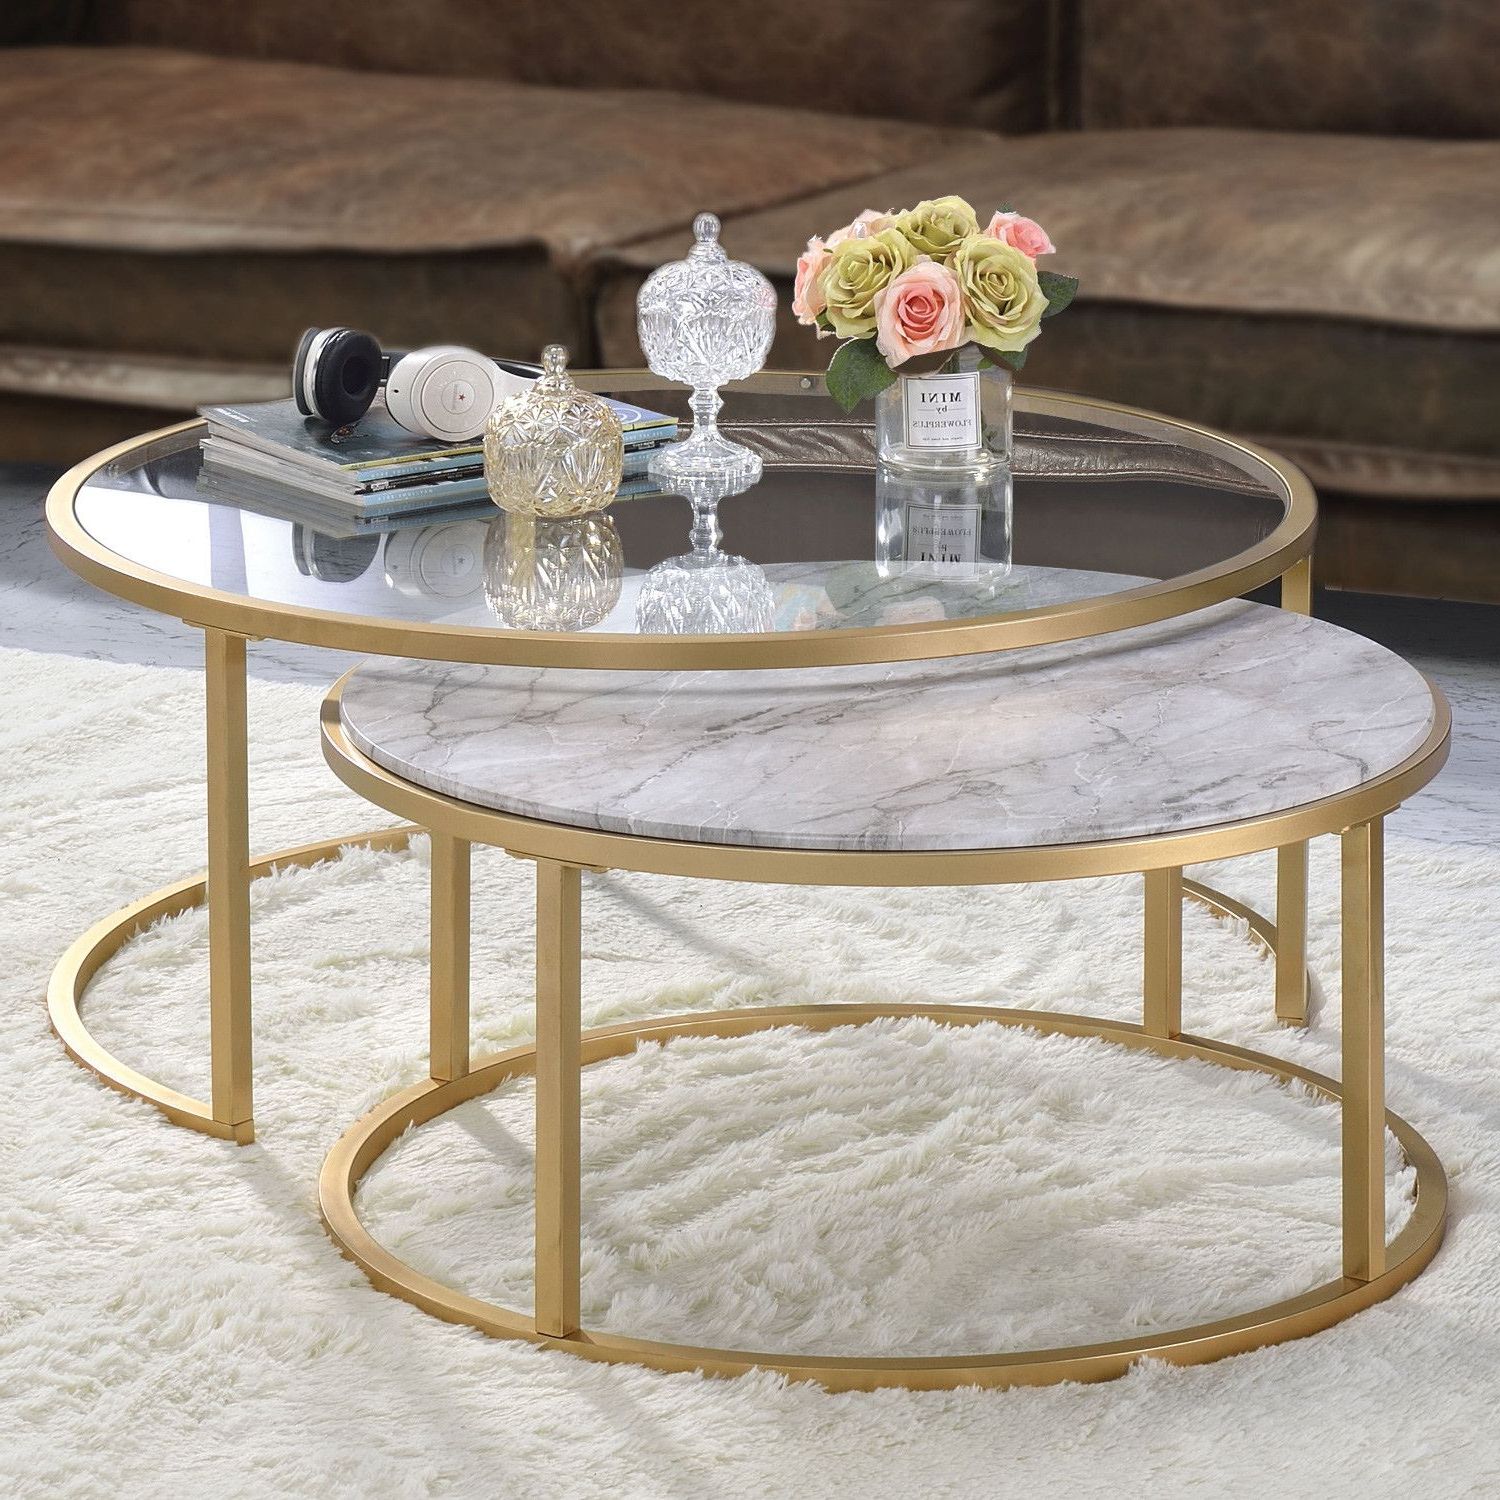 Trendy Geometric Glass Top Gold Coffee Tables Inside Gold And Glass Nesting Coffee Tables : The Leo Coffee (View 10 of 20)